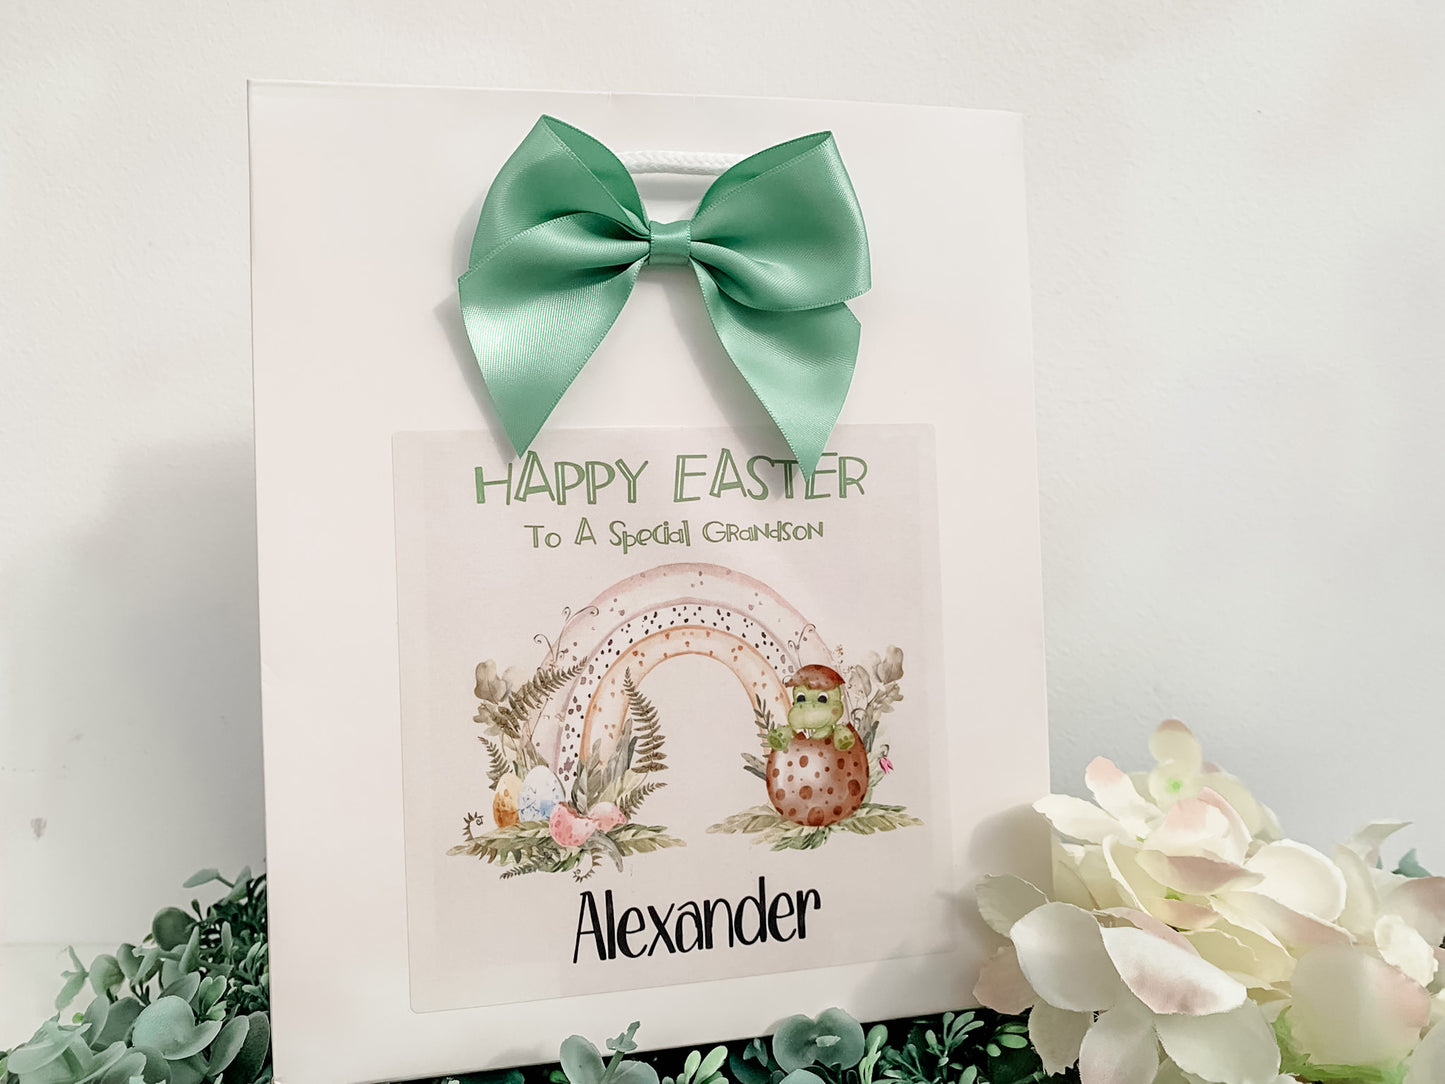 a happy easter card with a green bow